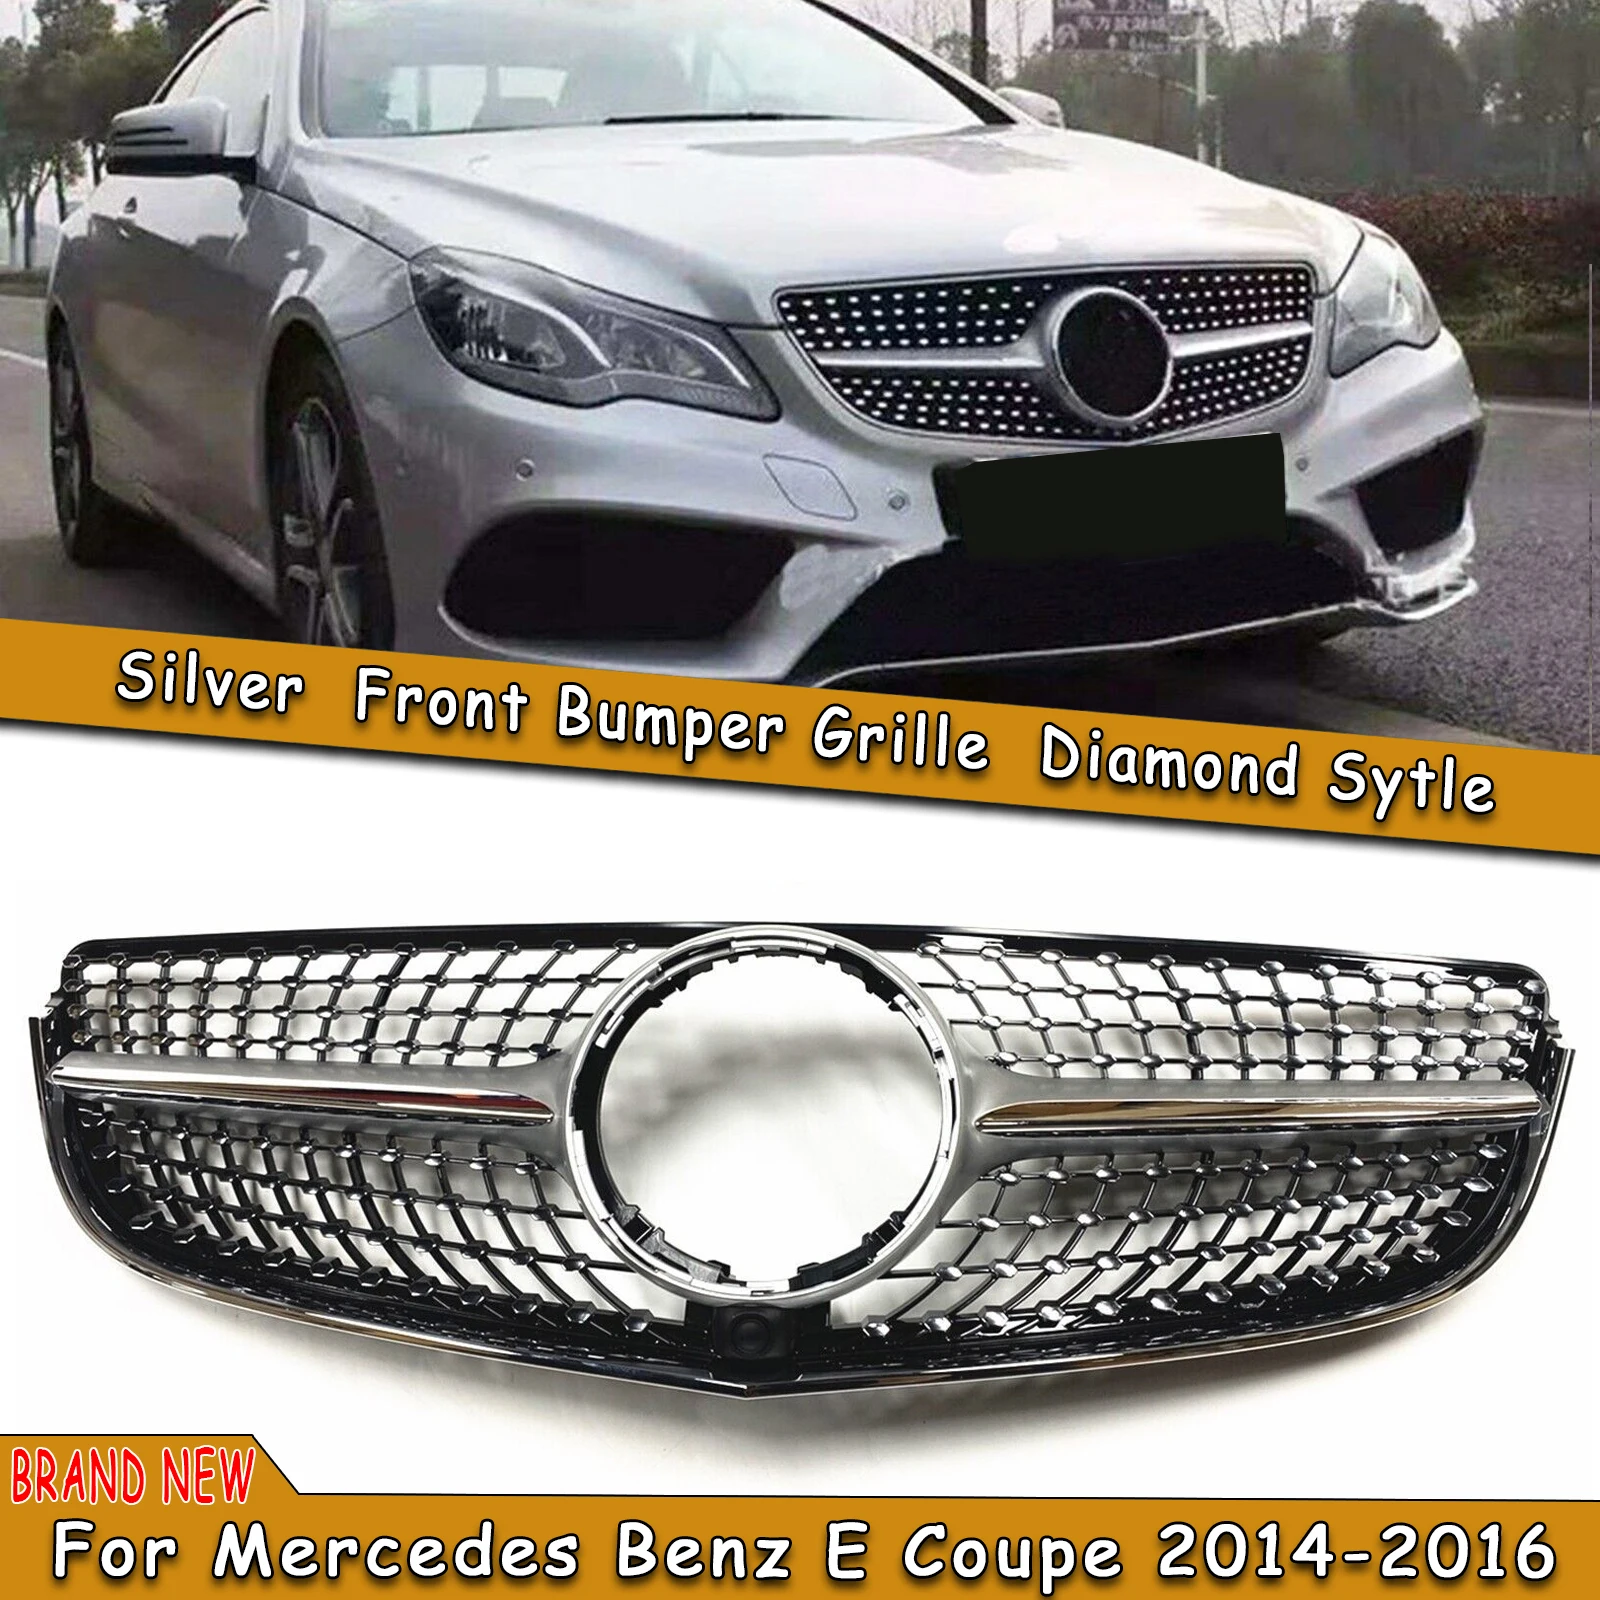 

Car Upper Grille Grill Front Bumper Hood Mesh Auto Accessories For Mercedes Benz E Coupe C207 A207 W207 2014 2015 2016 2017